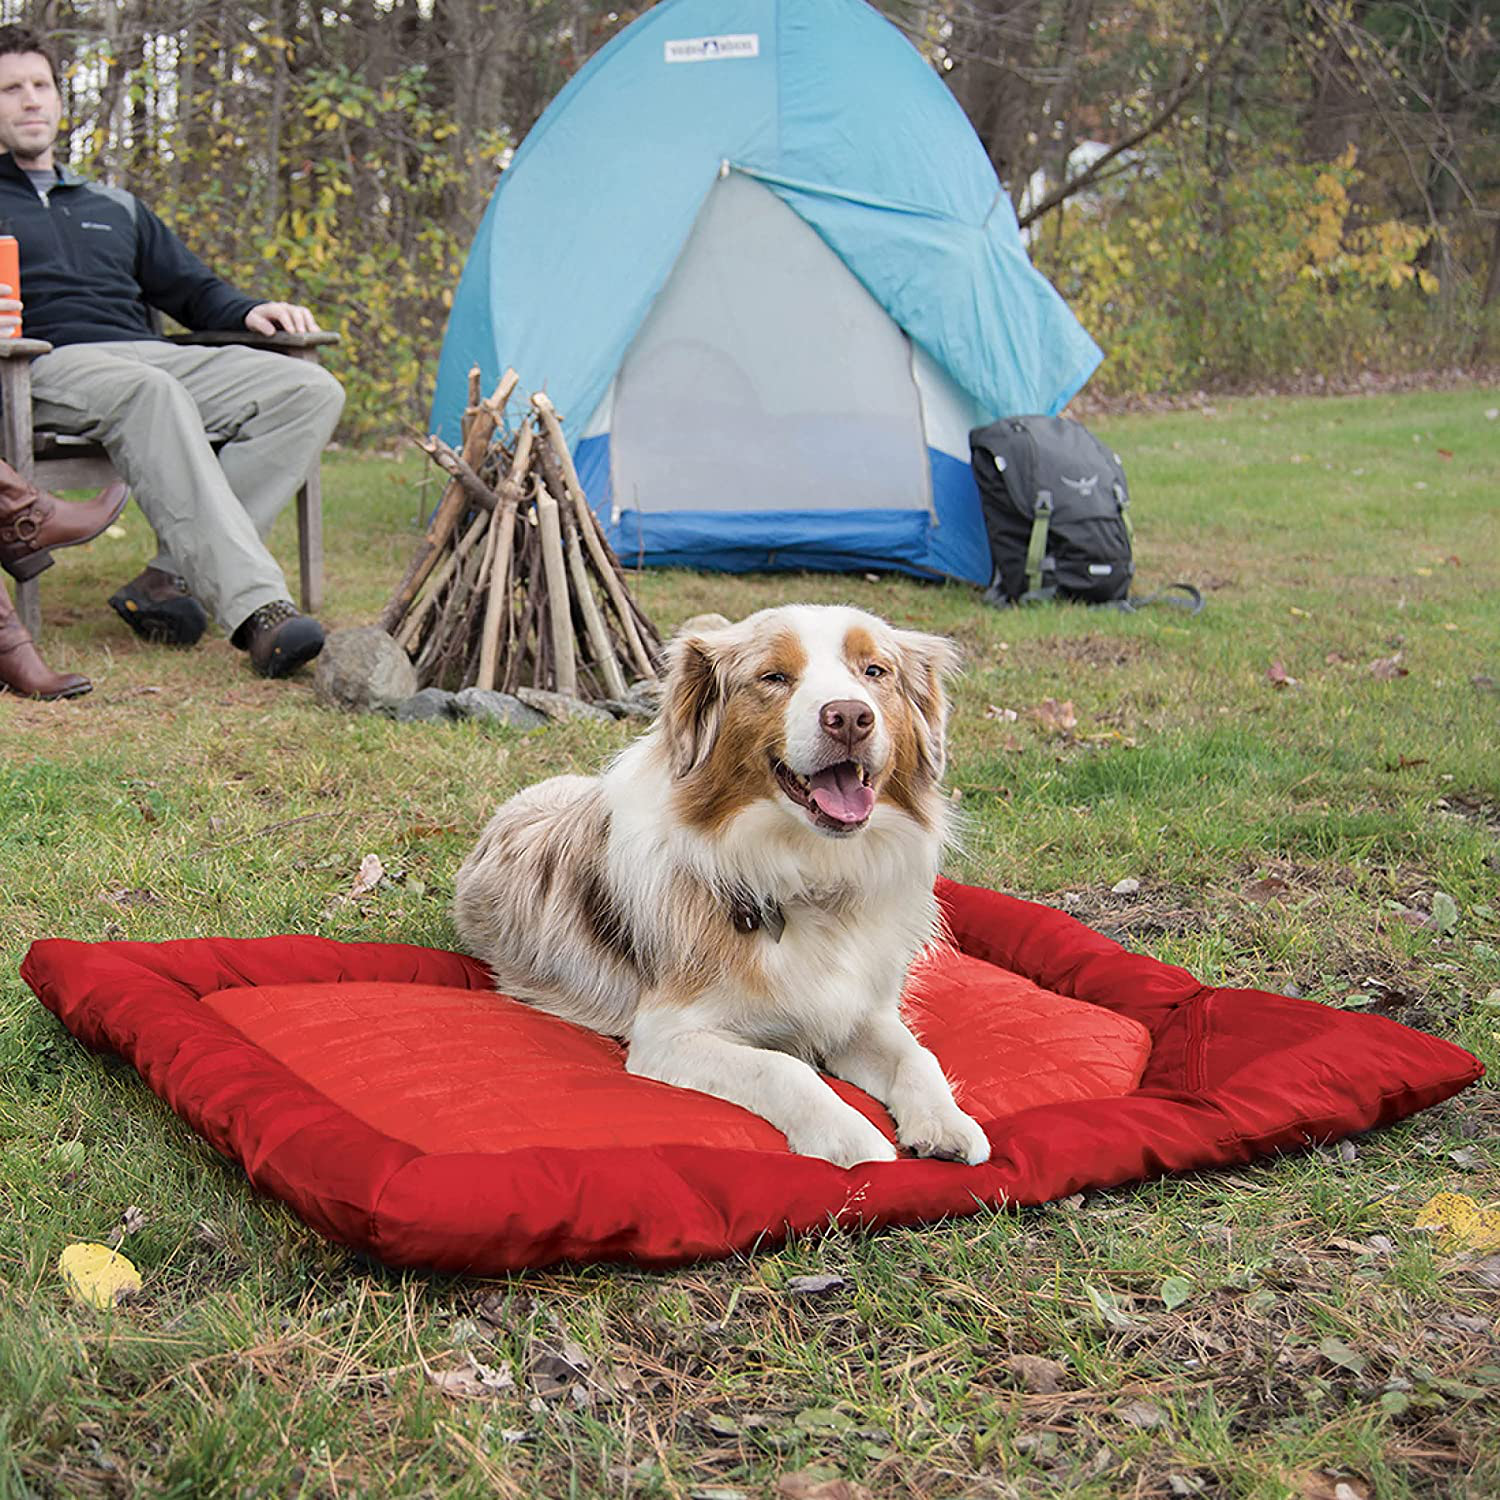 Kurgo Waterproof Dog Bed, Outdoor Bed for Dogs |Portable Bed Roll for Pets, Travel |Hiking, Camping, Wander Loft Dog Bed |Chili Red (Medium)